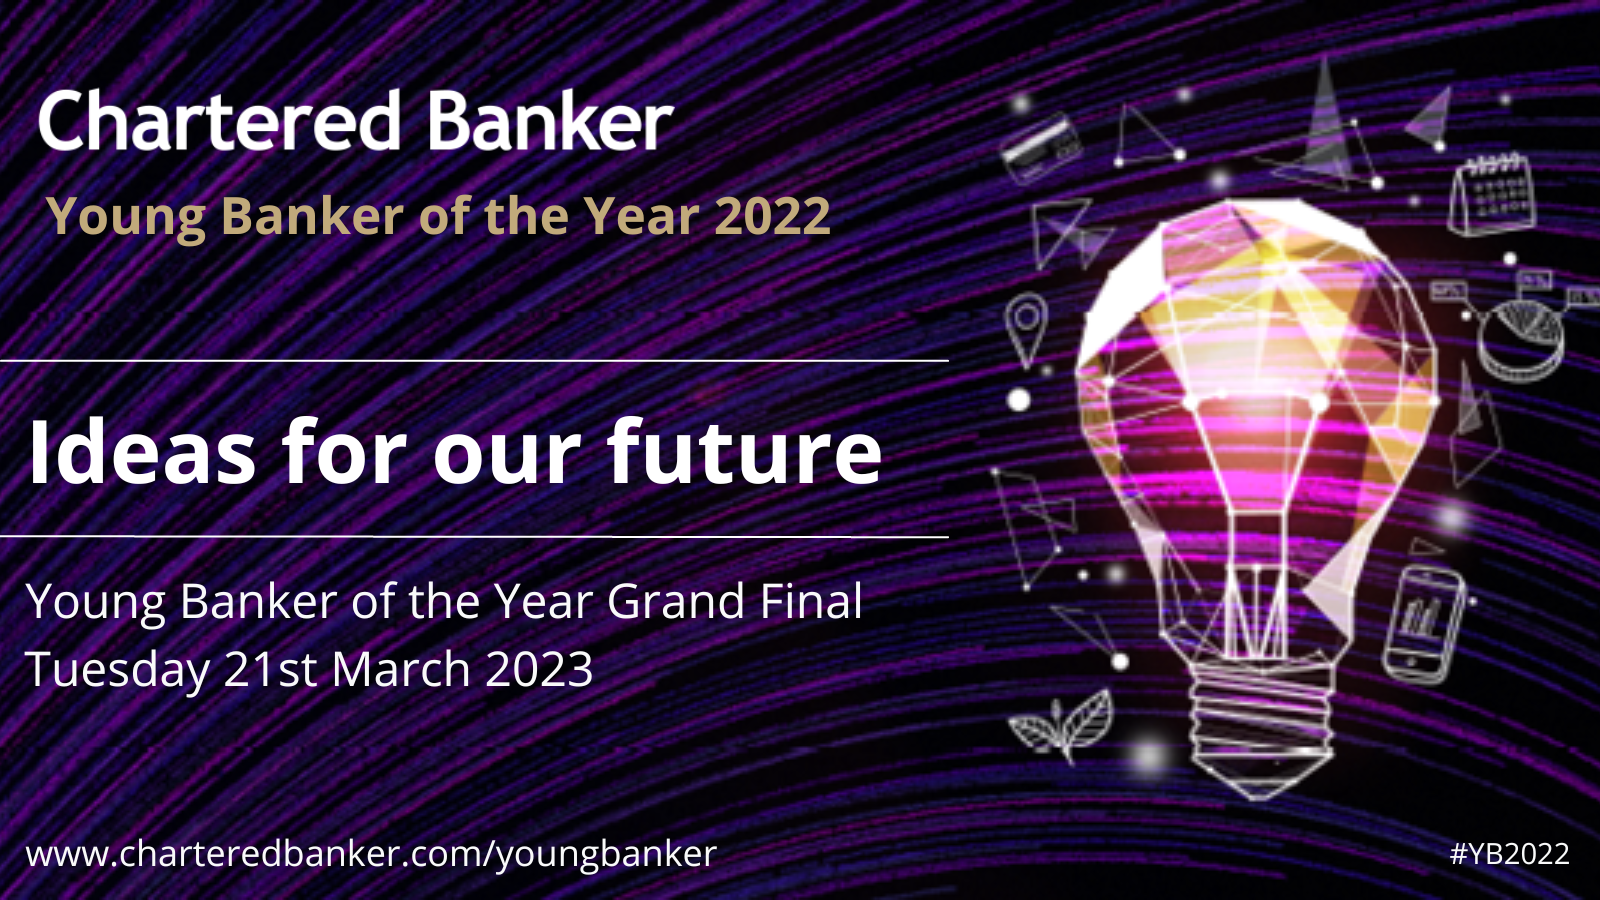 Young Banker of the Year 2022 Grand Final Highlights